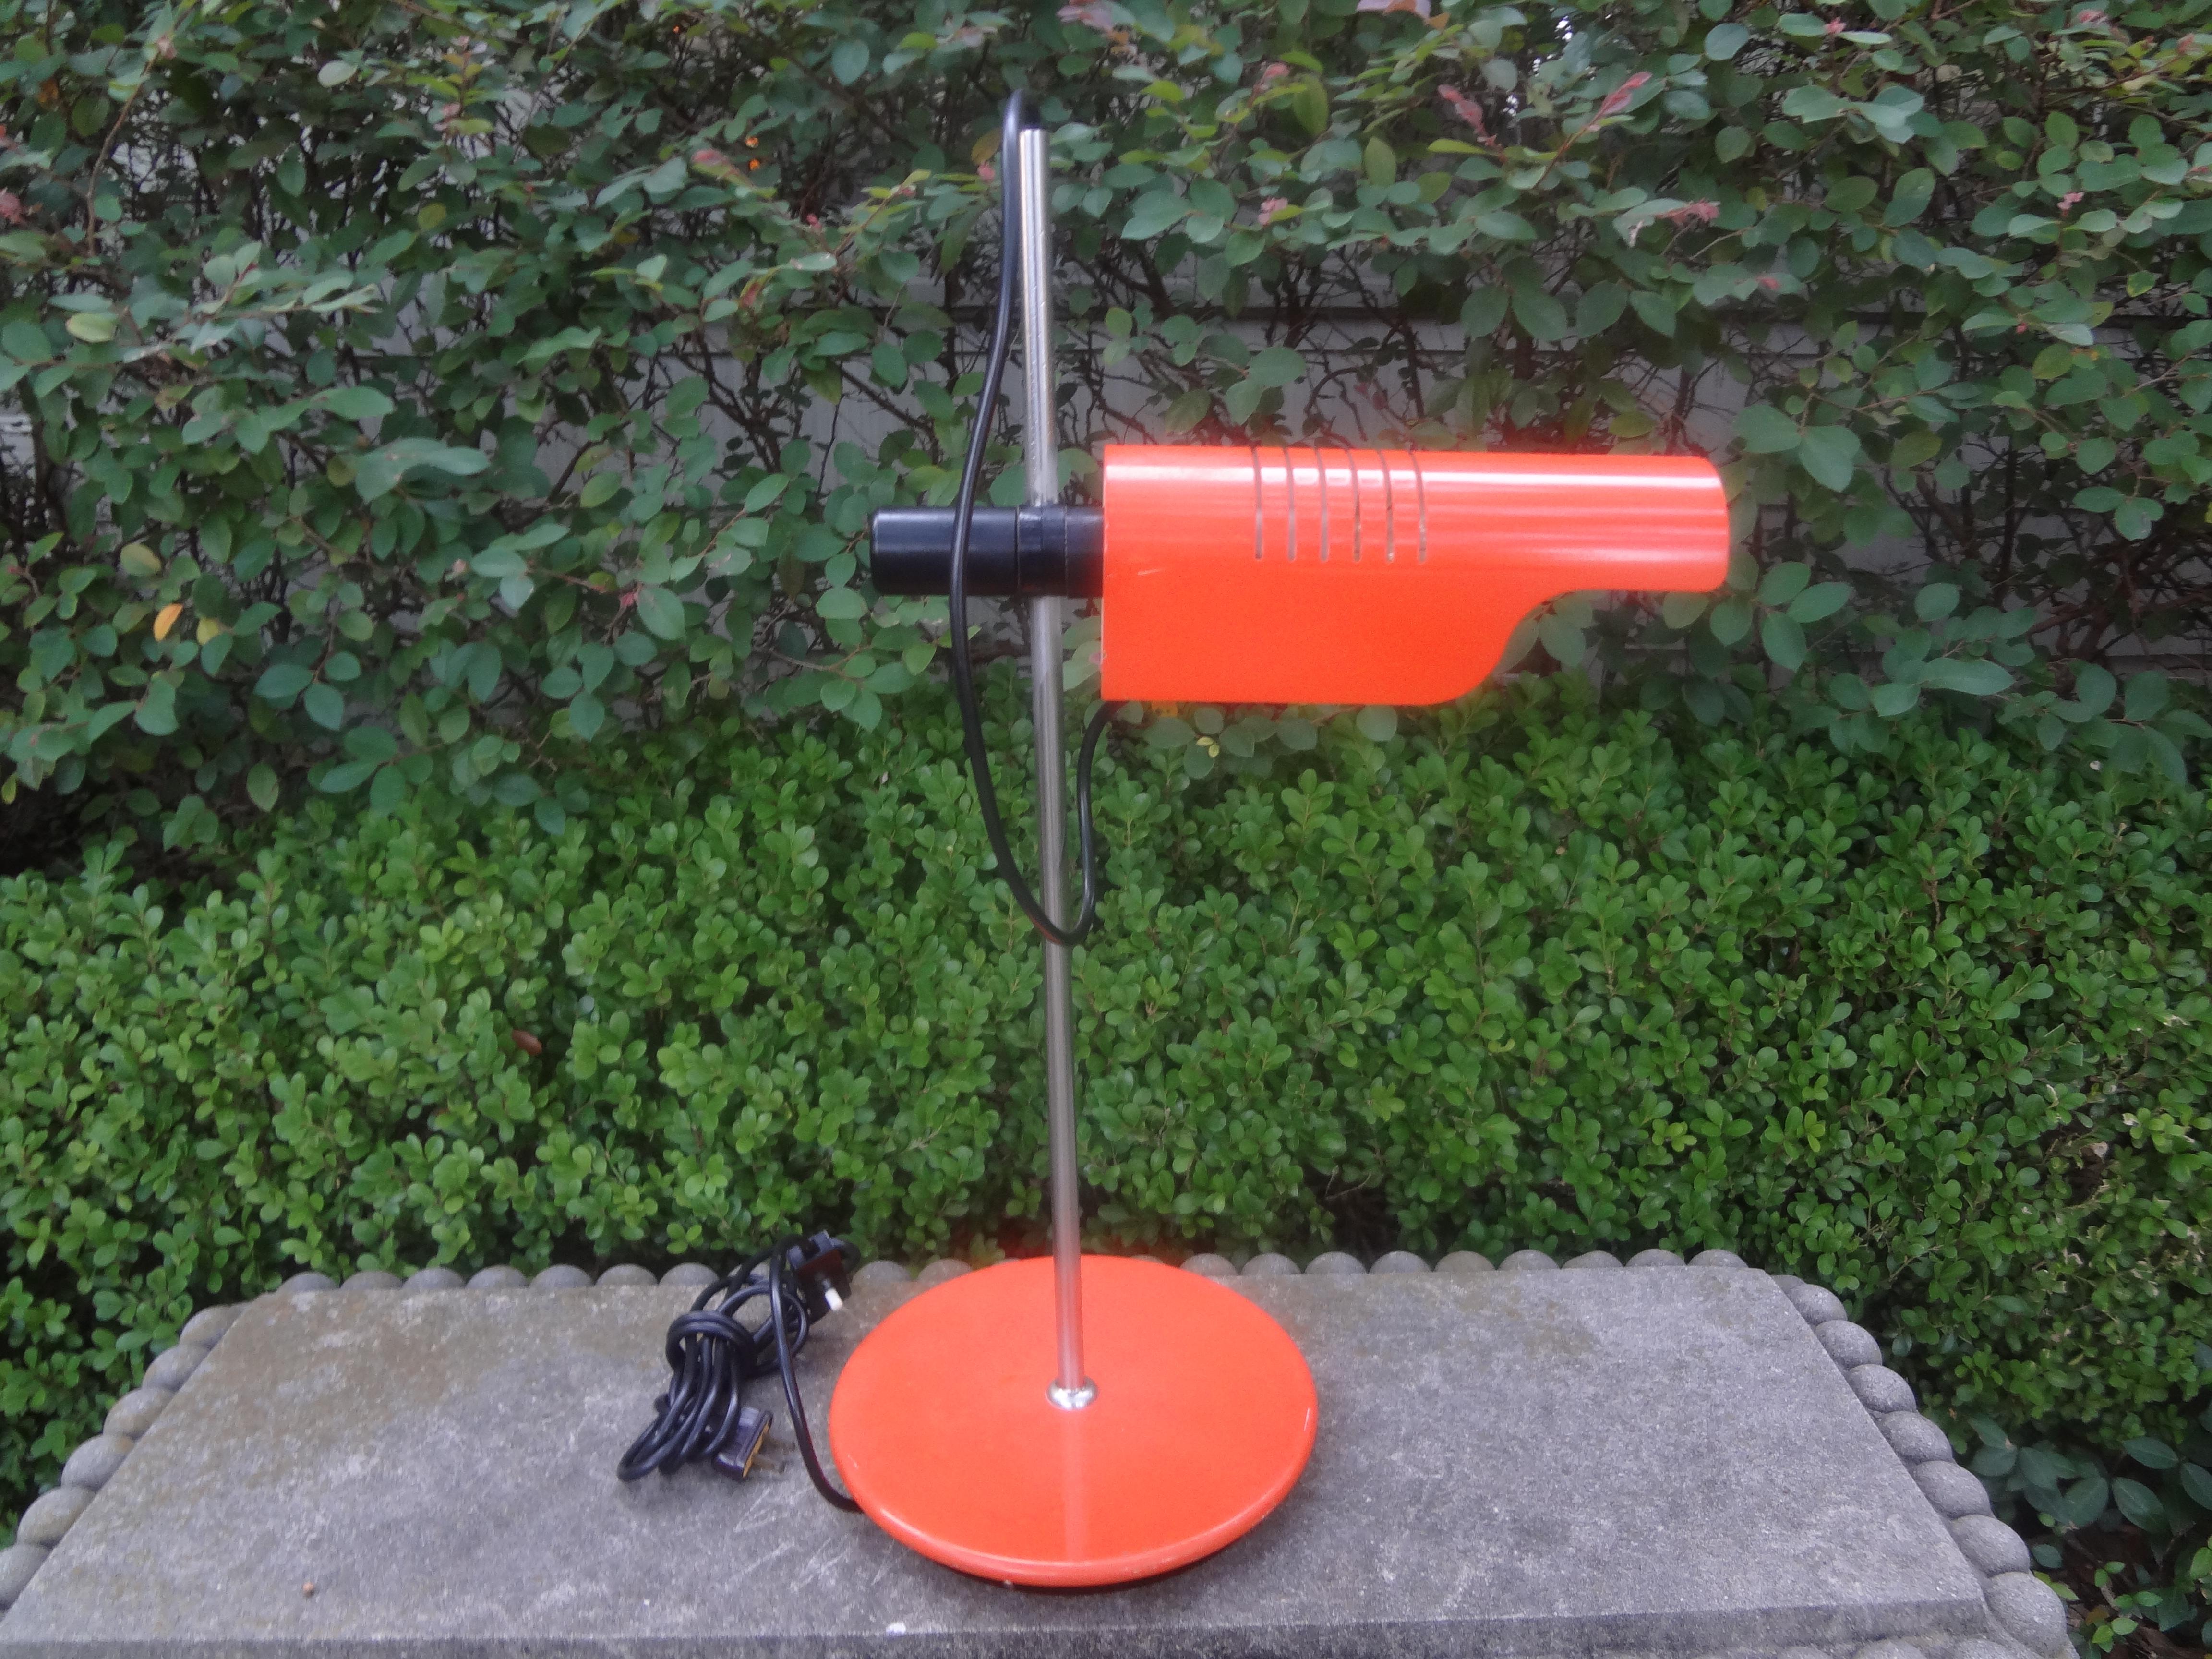 Mid Century Modern Dutch Enameled Metal Desk Lamp.
This sculptural orange enameled designer lamp is an artful way to light your desk.
Beautifully executed with attention to detail and newly wired for the U.S. market with an Edison socket.